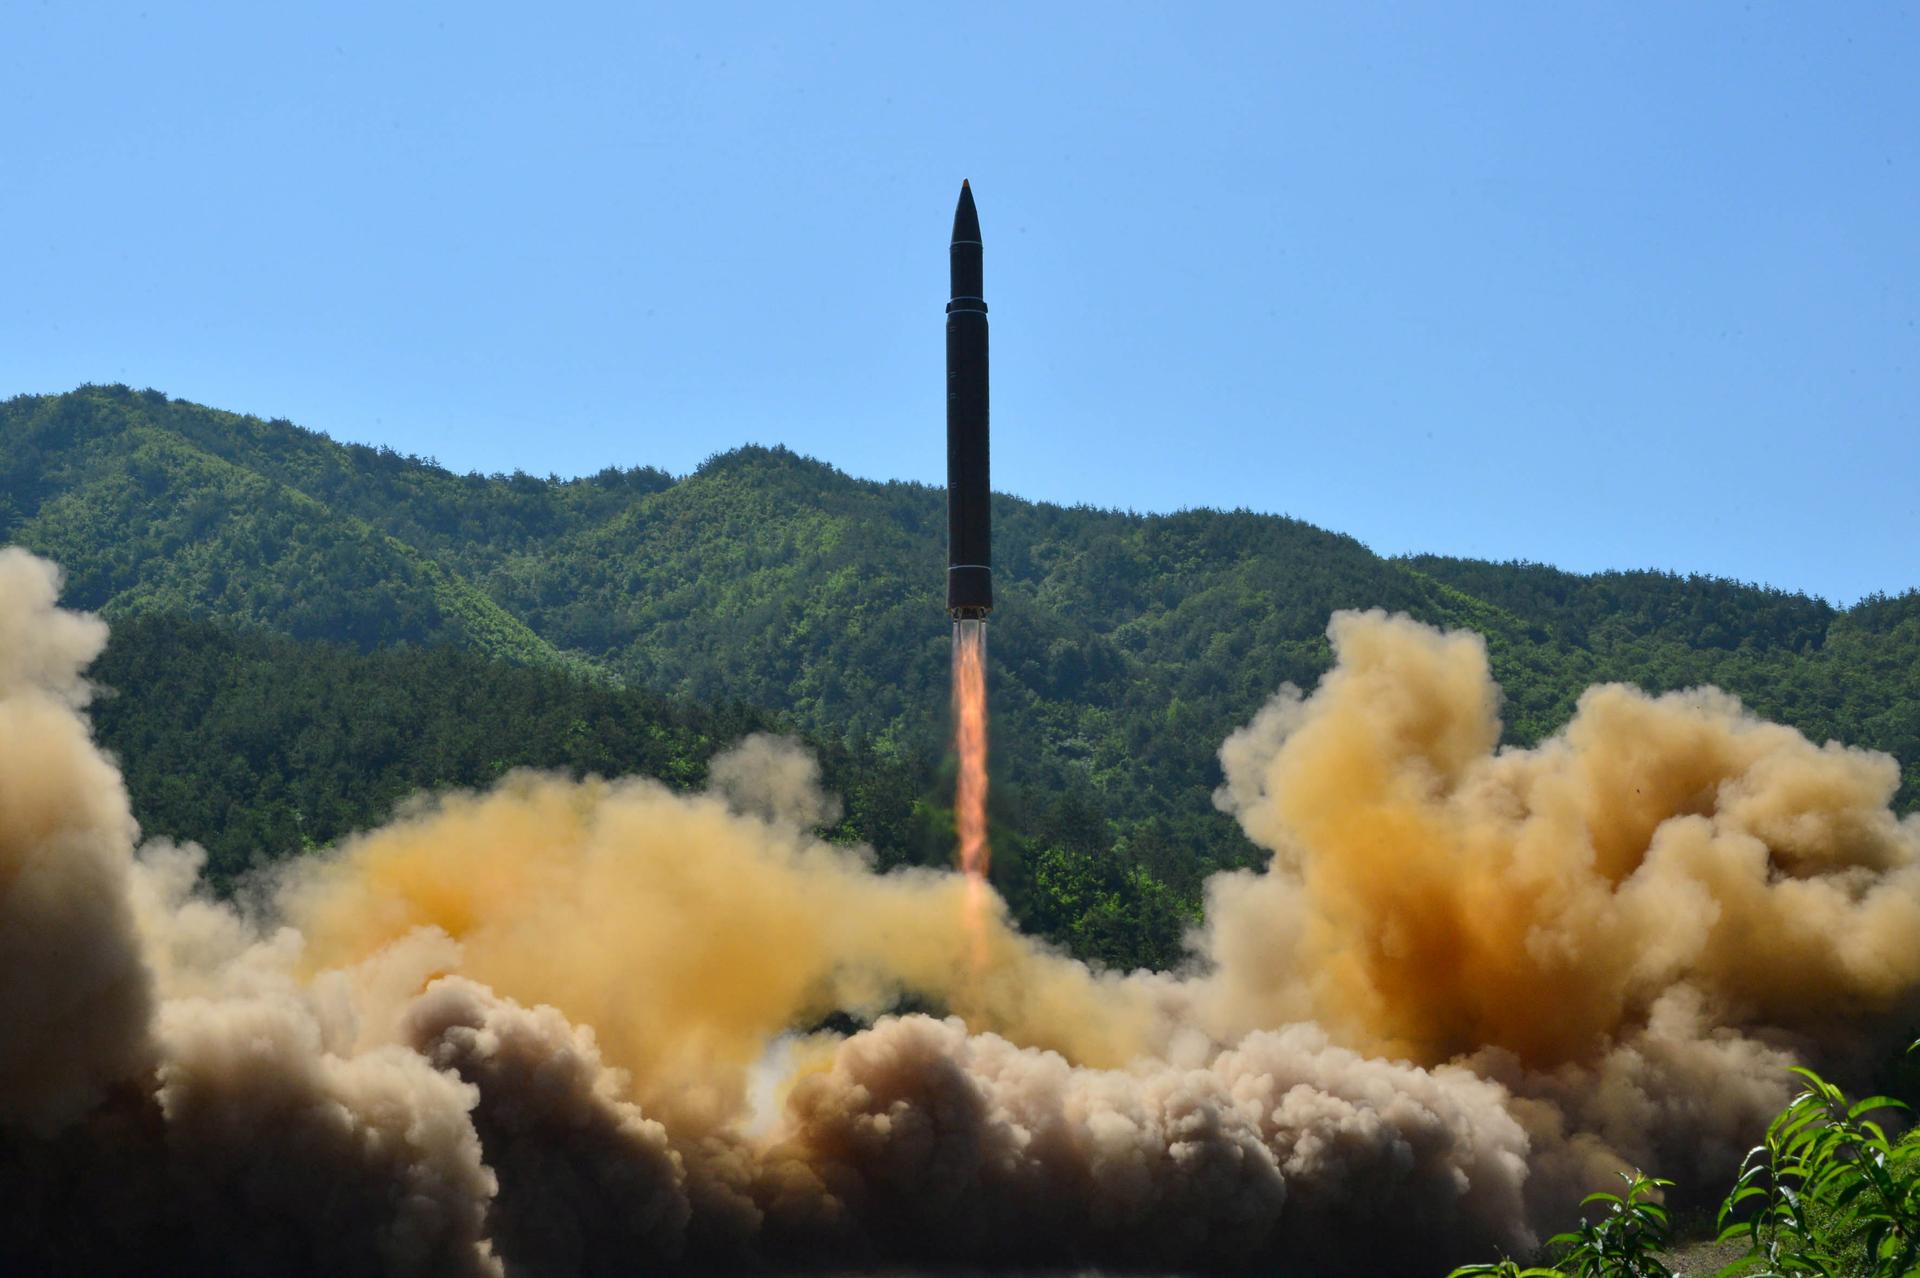 A North Korean image said to be the launch of that nation's first inter-continental missile, on July 4th 2017